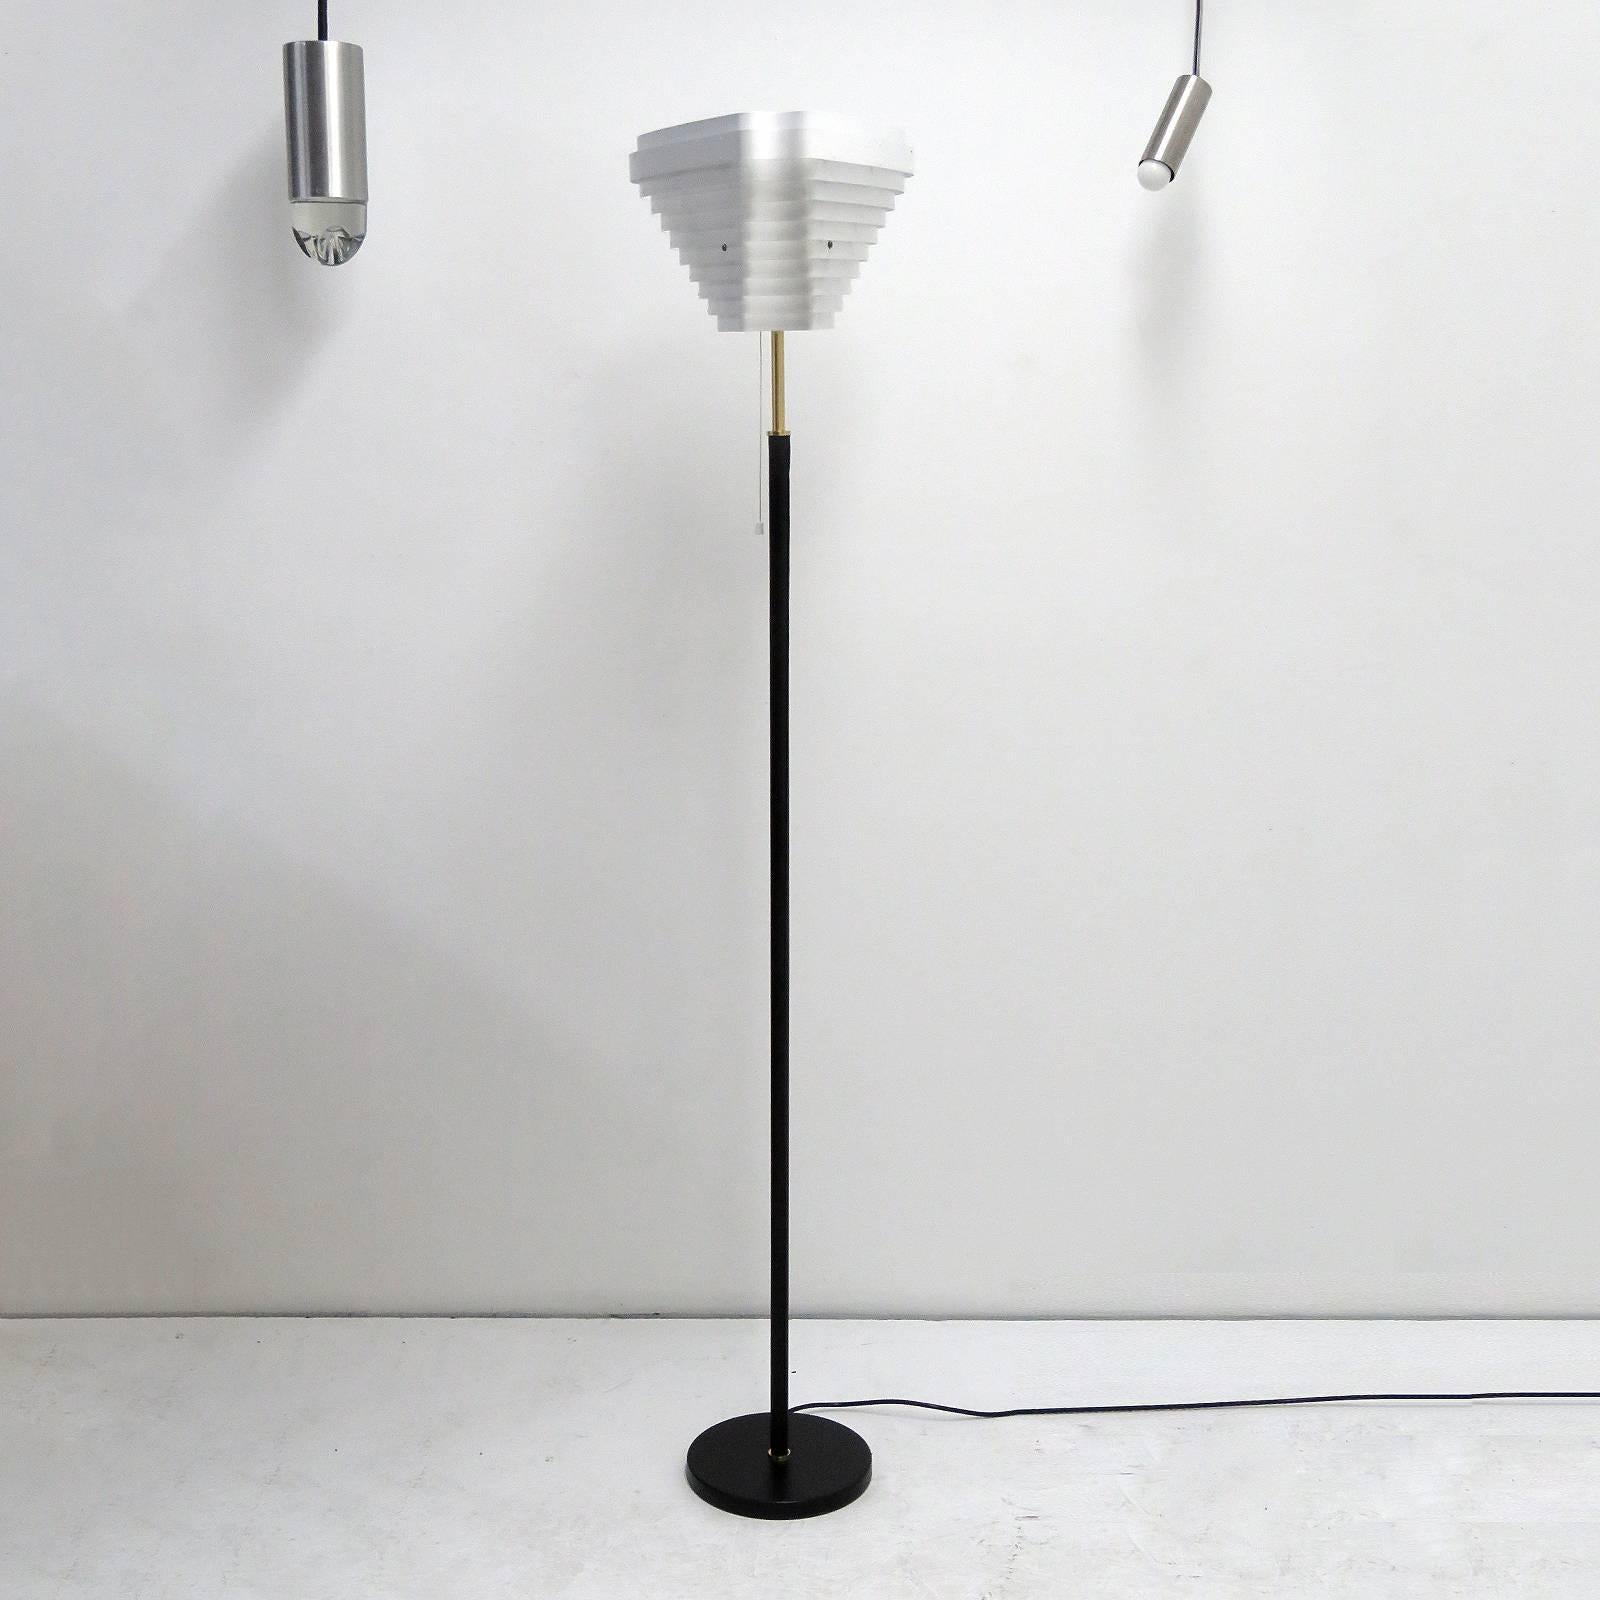 Stunning floor lamp model A805 'Angel Wing' designed by Alvar Aalto in 1954 and later manufactured by Valaisinpaja Oy, Finland with white louvered metal shade, shaft and base covered with black leather, brass details, marked with manufacturer label.